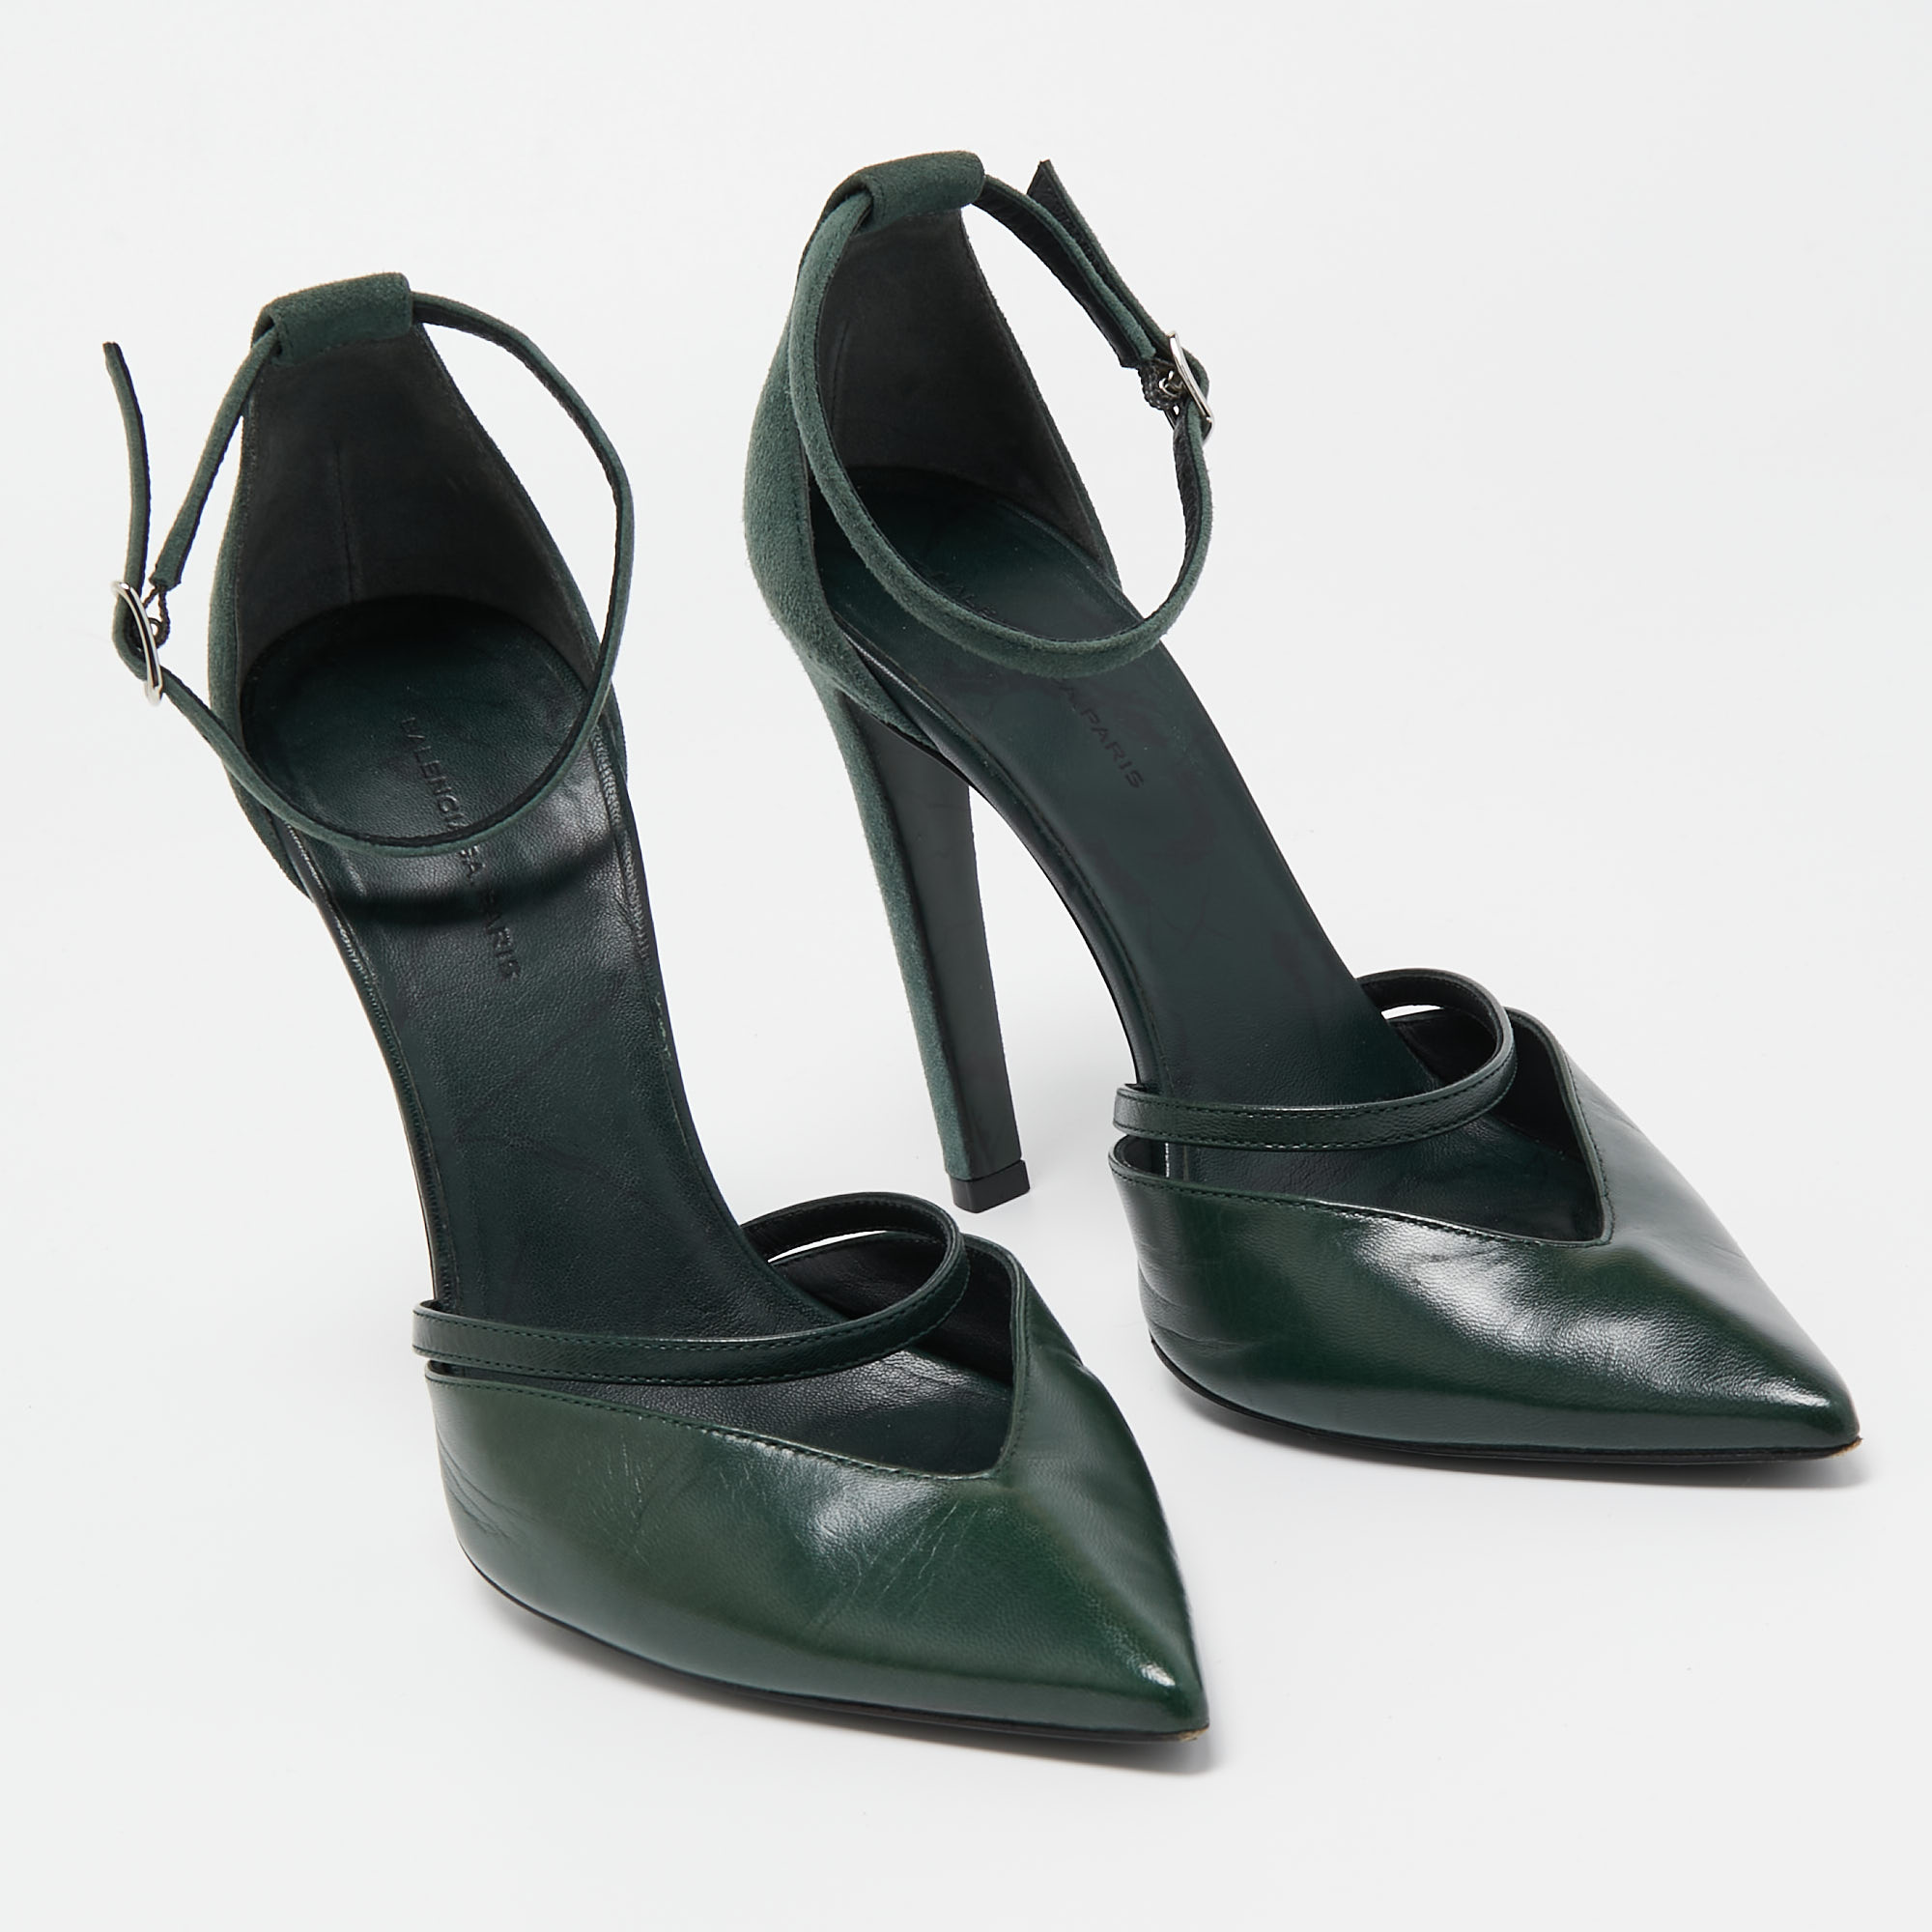 Balenciaga Green Leather And Suede Ankle Strap Pumps Size 38